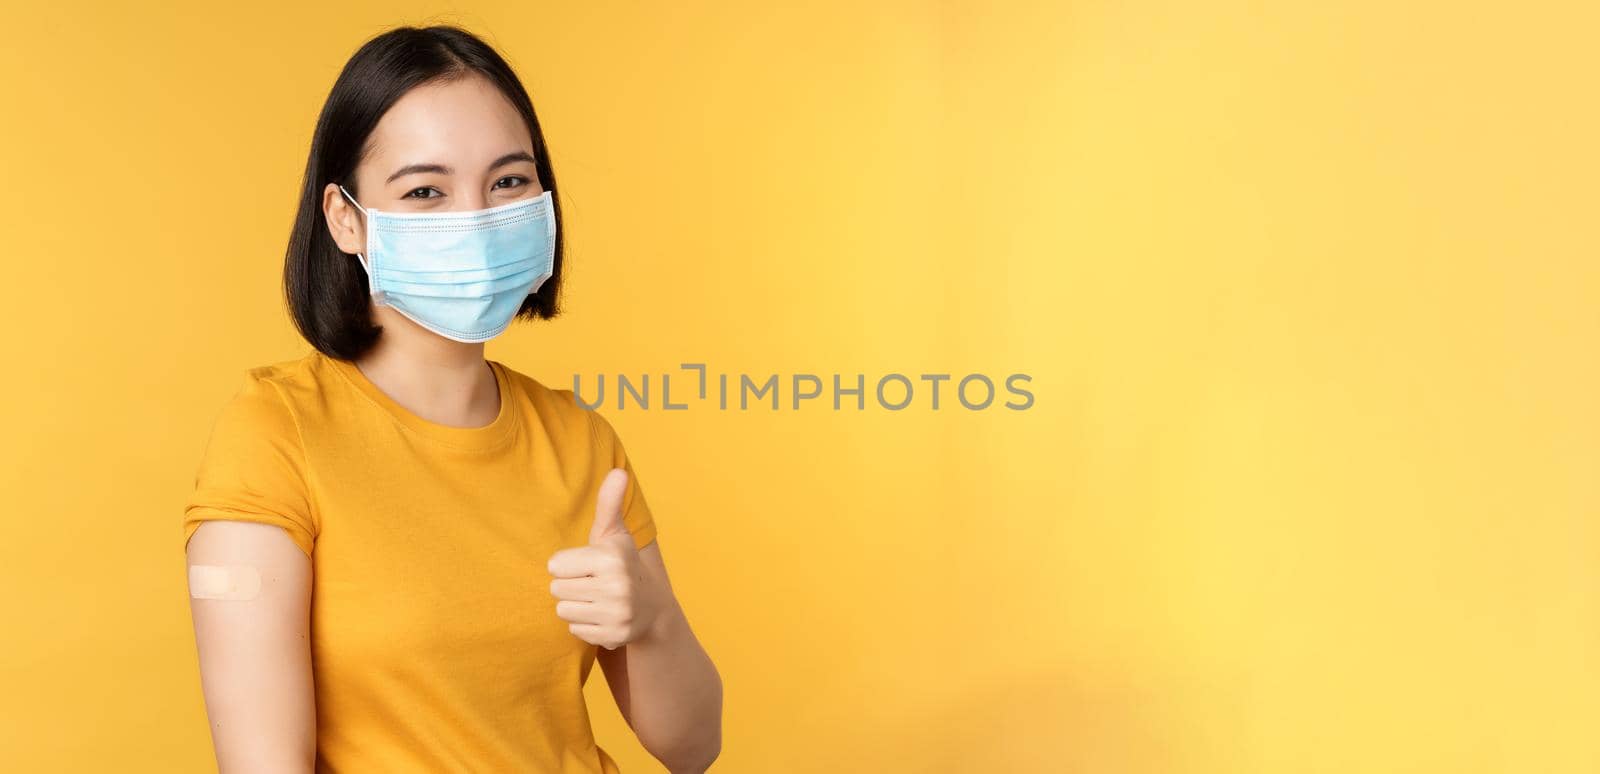 Vaccination from covid and health concept. Happy asian girl showing thumbs up, wearing medical mask, band aid on shoulder, got coronavirus vaccine shot, yellow background.